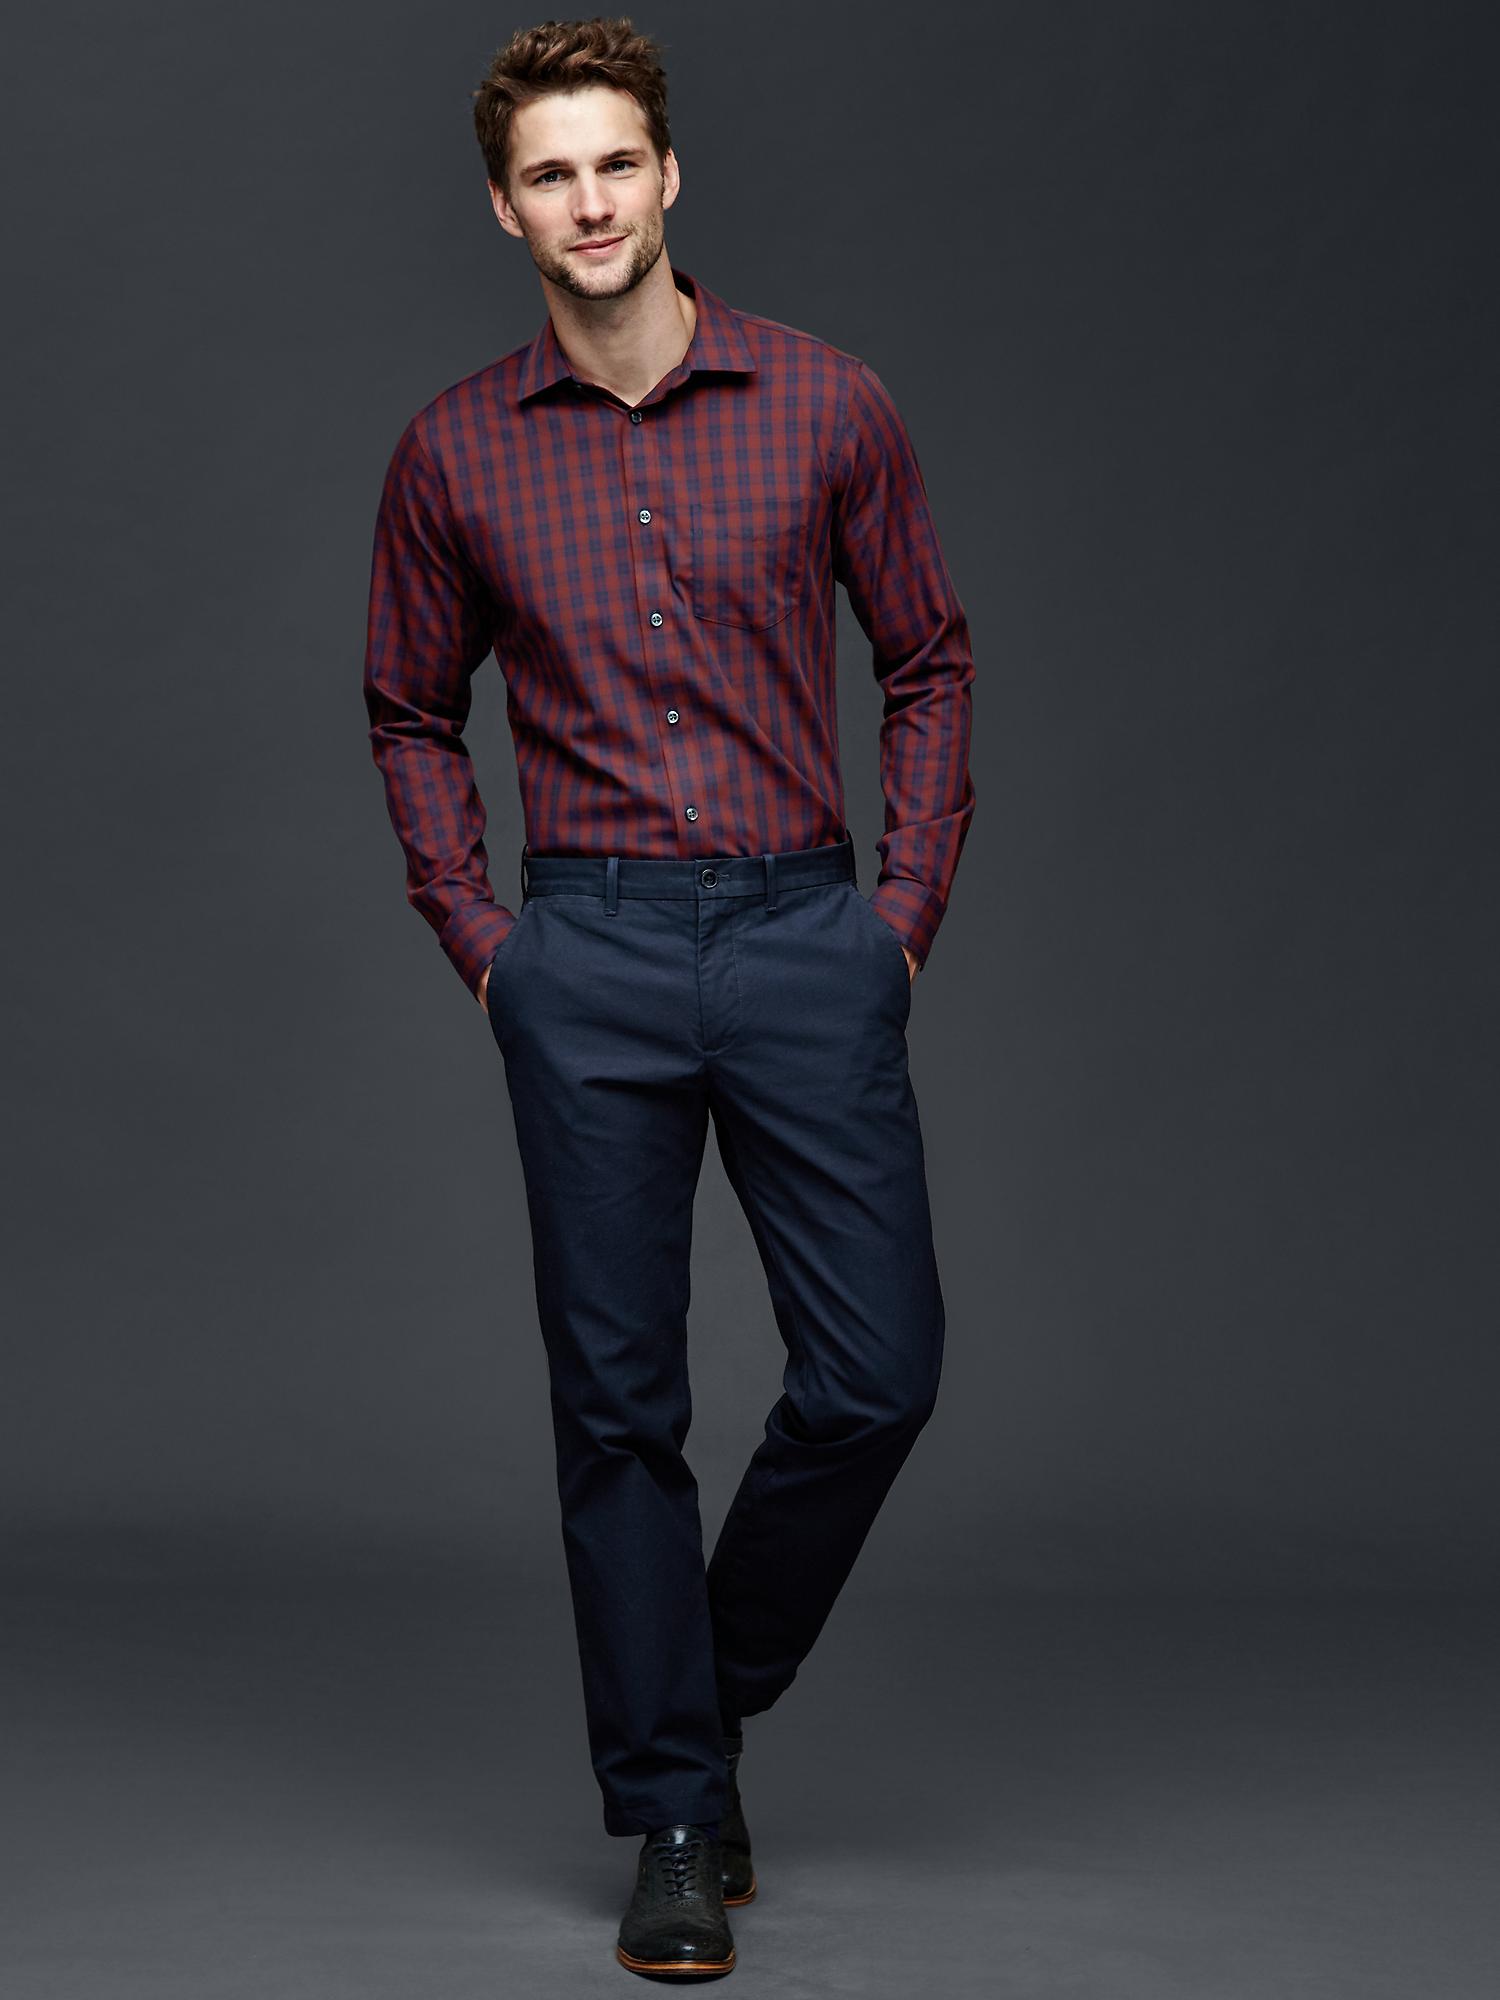 Blue Dress Pants with Red and Navy T-shirt Outfits For Men (6 ideas &  outfits) | Lookastic